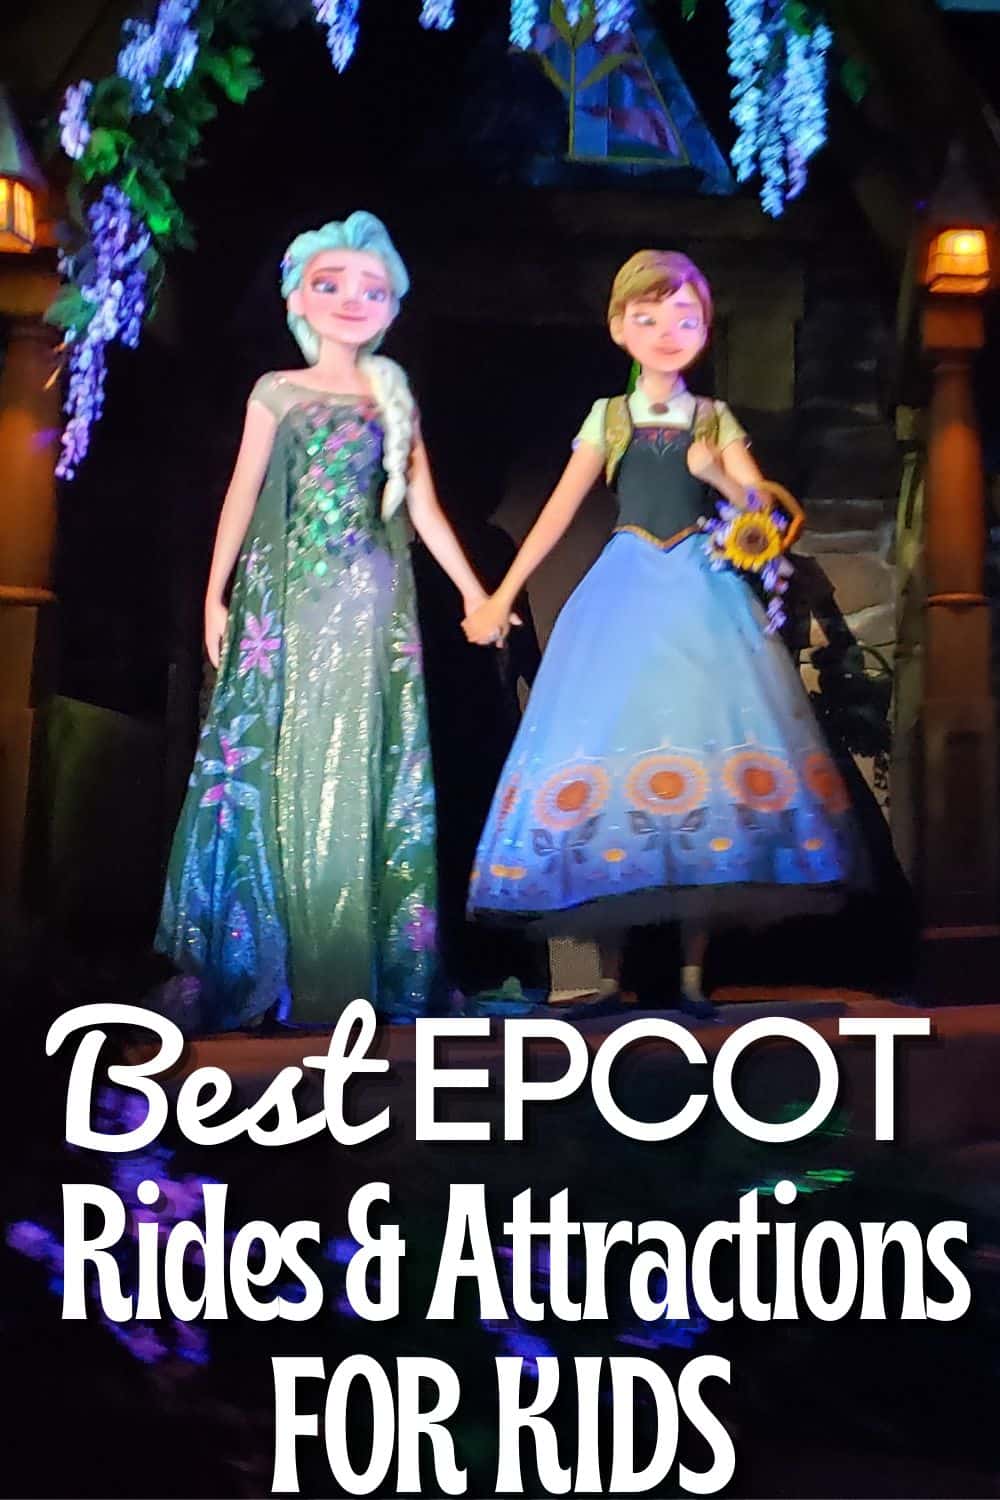 Best Rides & Attractions in EPCOT for Kids